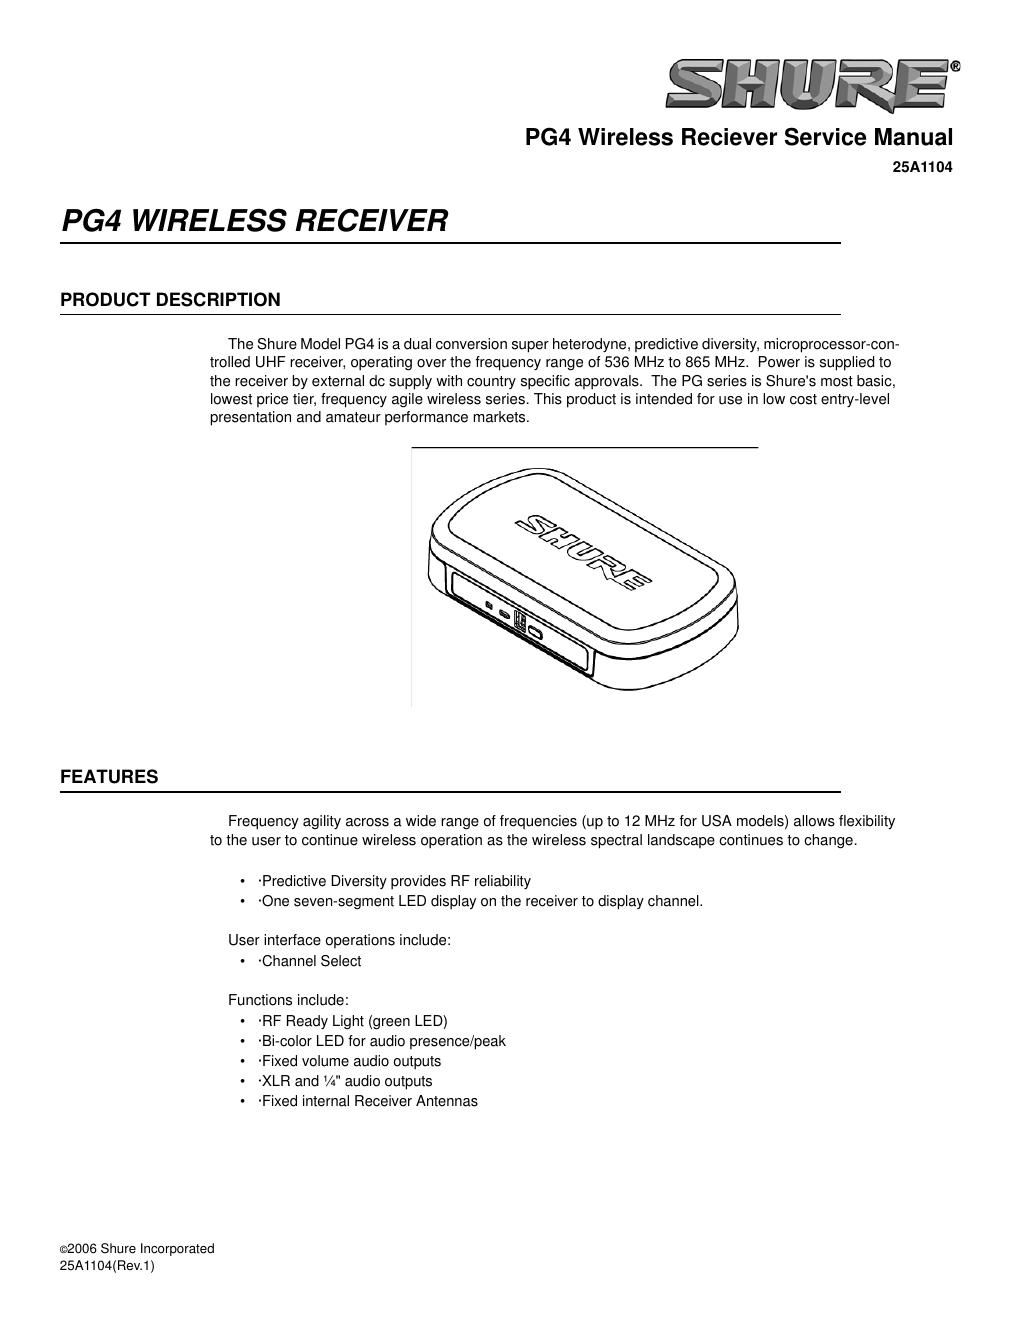 shure pg4 wireless receiver service manual